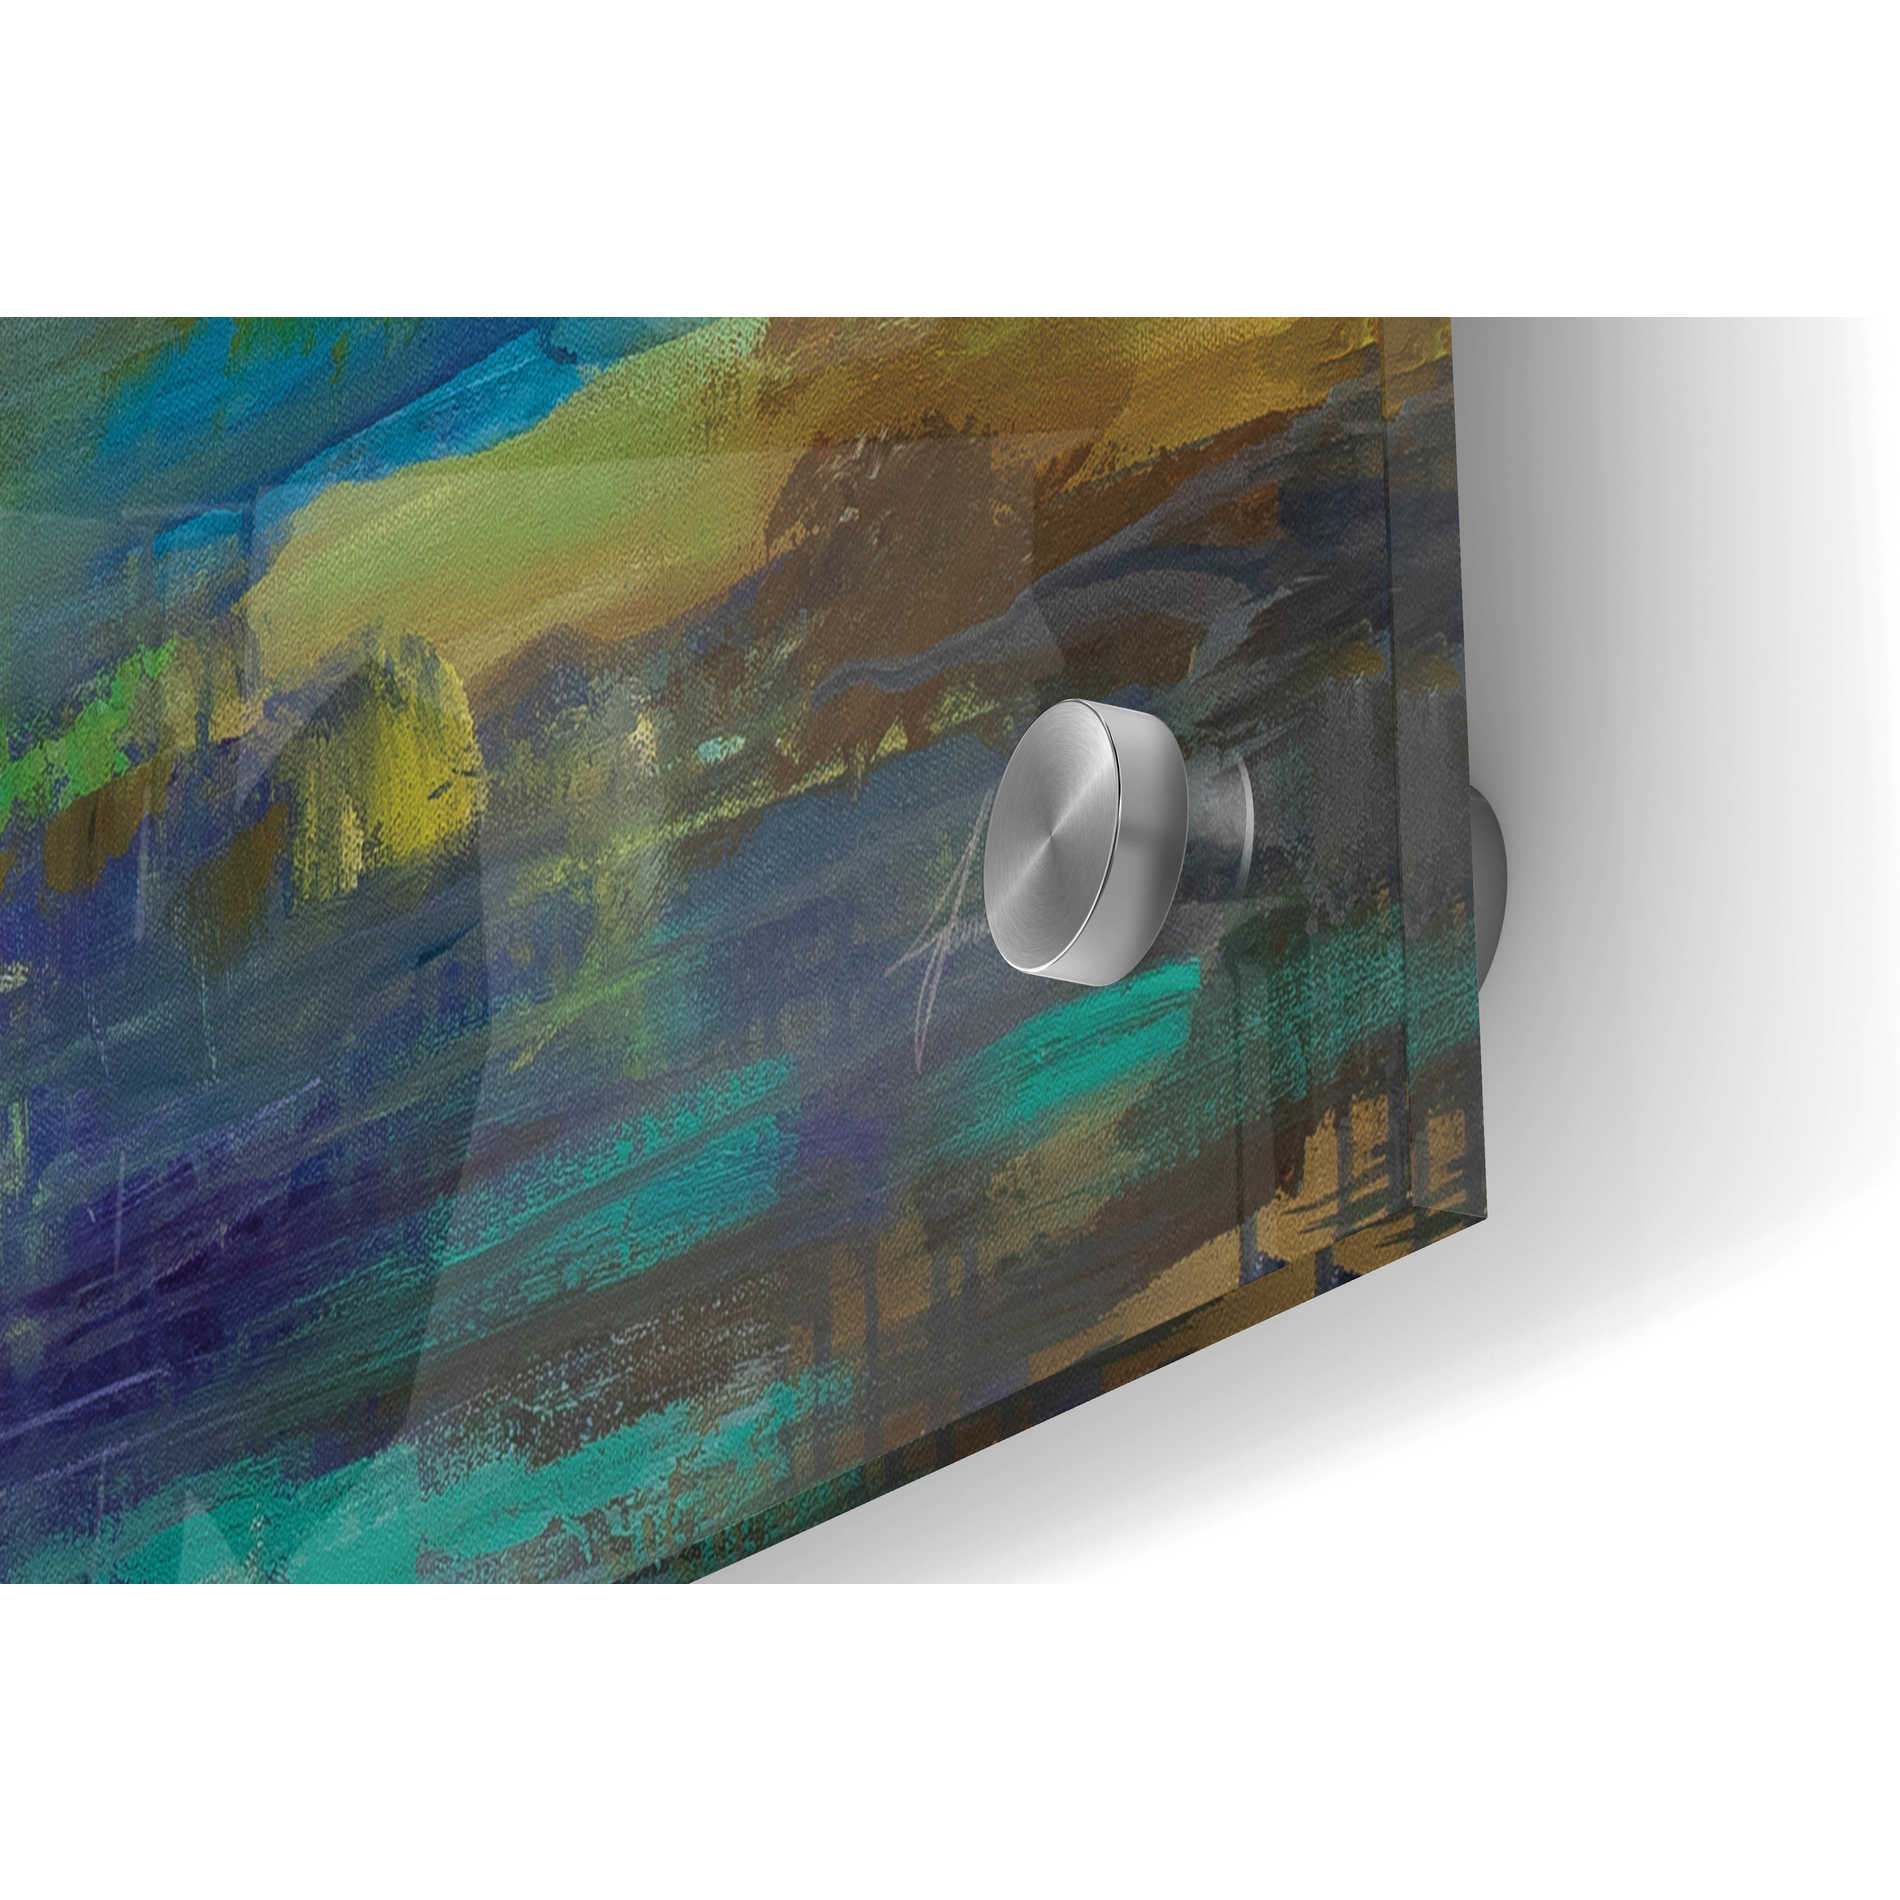 Epic Art 'Quietude' by Jeanette Vertentes, Acrylic Glass Wall Art,36x24